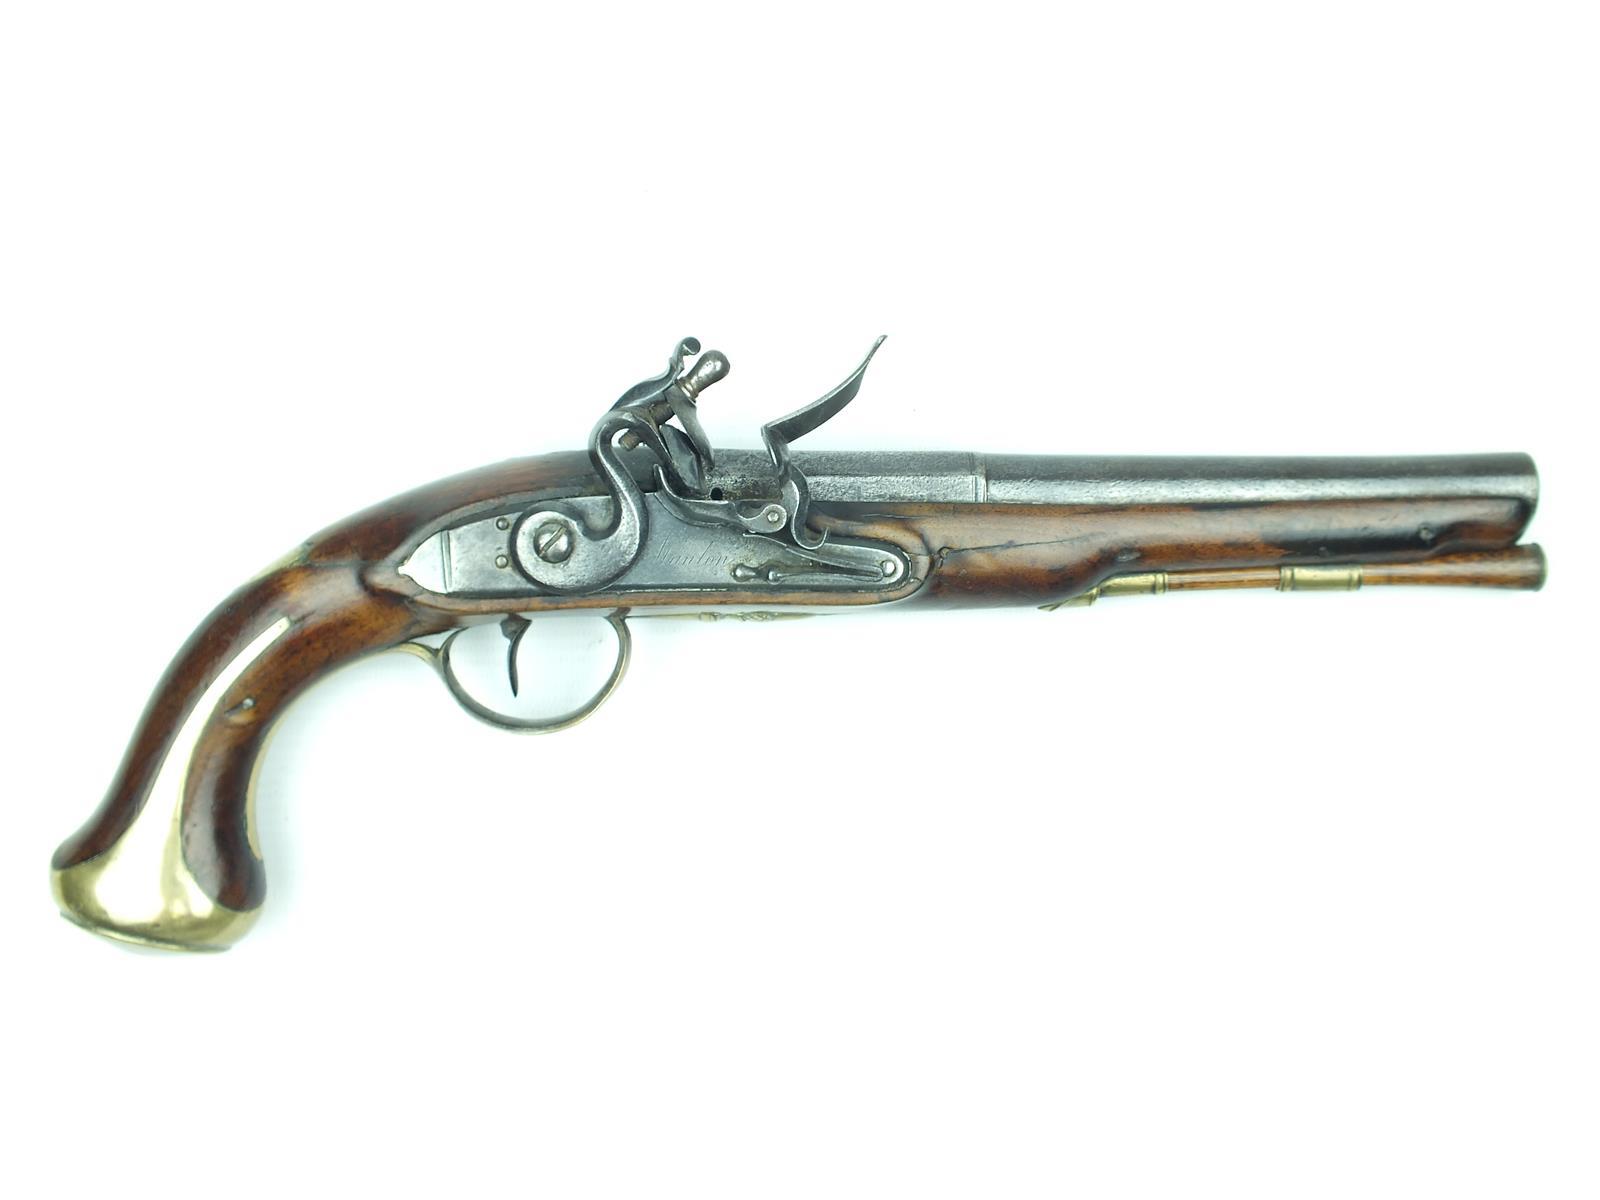 A 22-bore flintlock Livery pistol by Manton, 8inch two-stage slightly swamped barrel, stepped lock